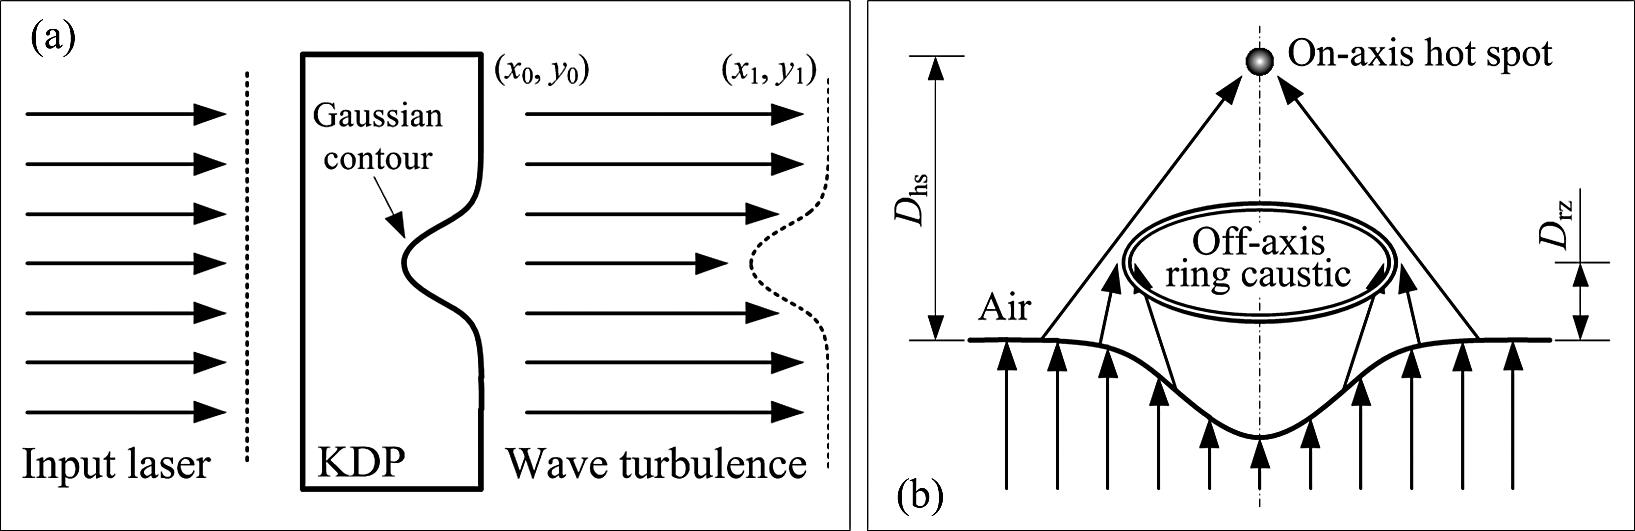 The effect of the Gaussian mitigation pit on the far-field propagation of the outgoing laser. (a) Sketch of the far-field modulation caused by the Gaussian mitigation contour on a KDP rear surface. (b) The relative positions of two dominant downstream light intensification patterns caused by the Gaussian mitigation pit on a KDP rear surface. Dhs and Drz refer to the focal lengths of on-axis hot spot and off-axis ring caustic, respectively.